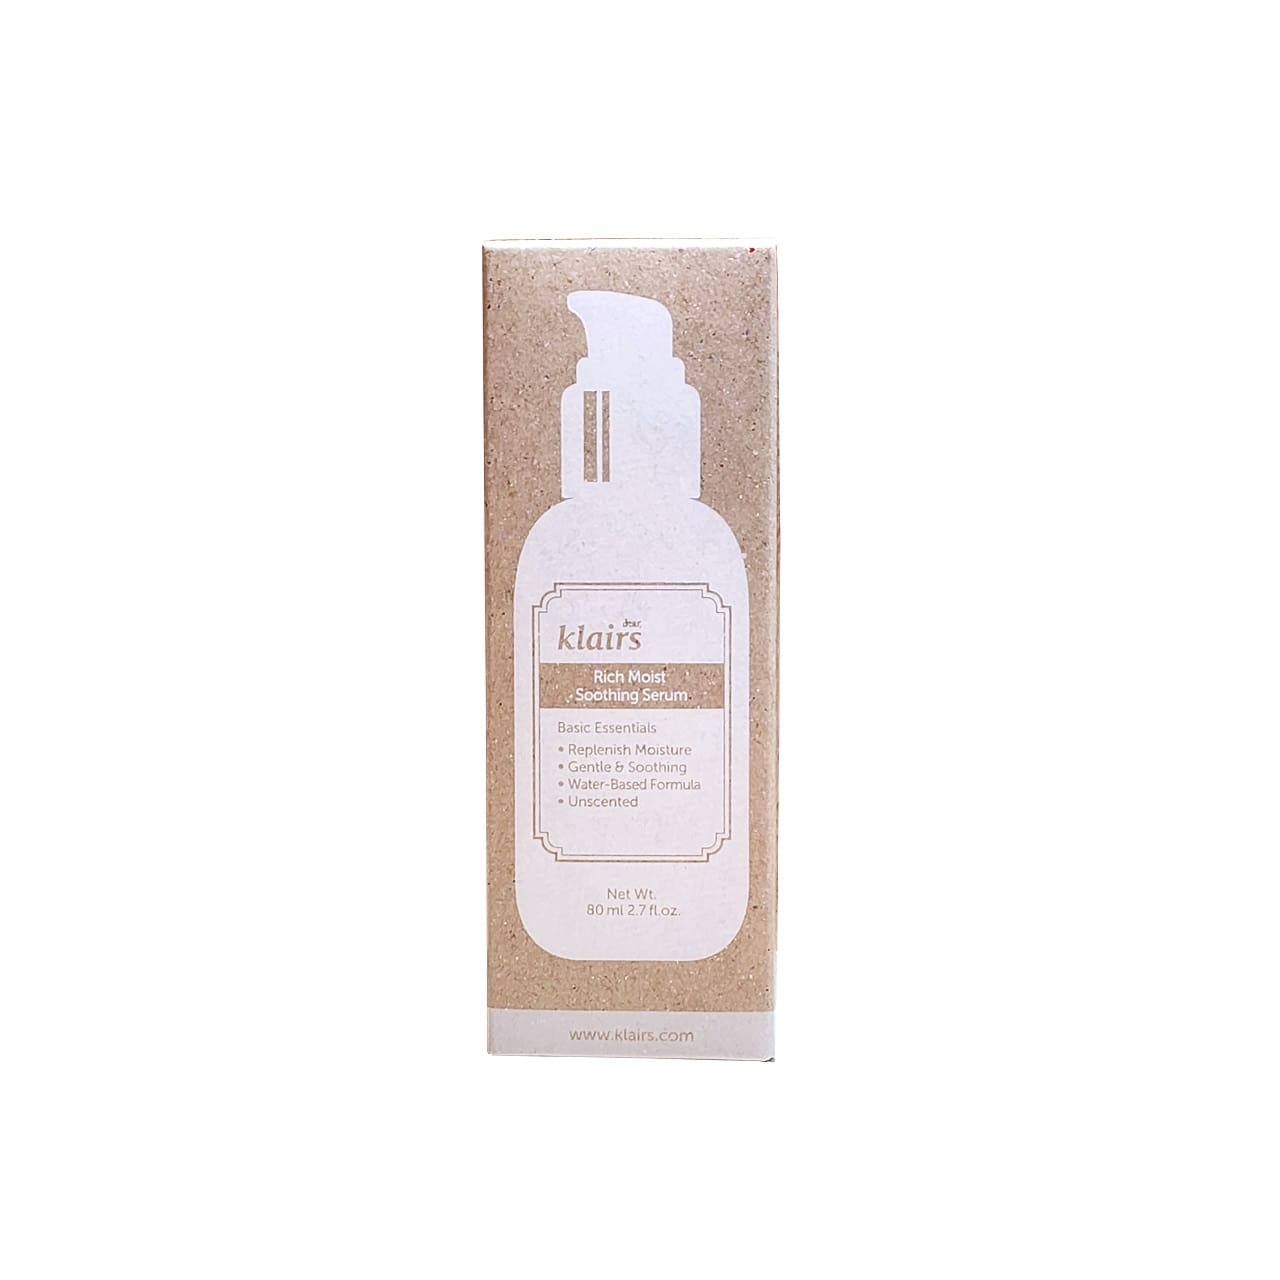 Product label for Klairs Rich Moist Soothing Serum (80 mL)